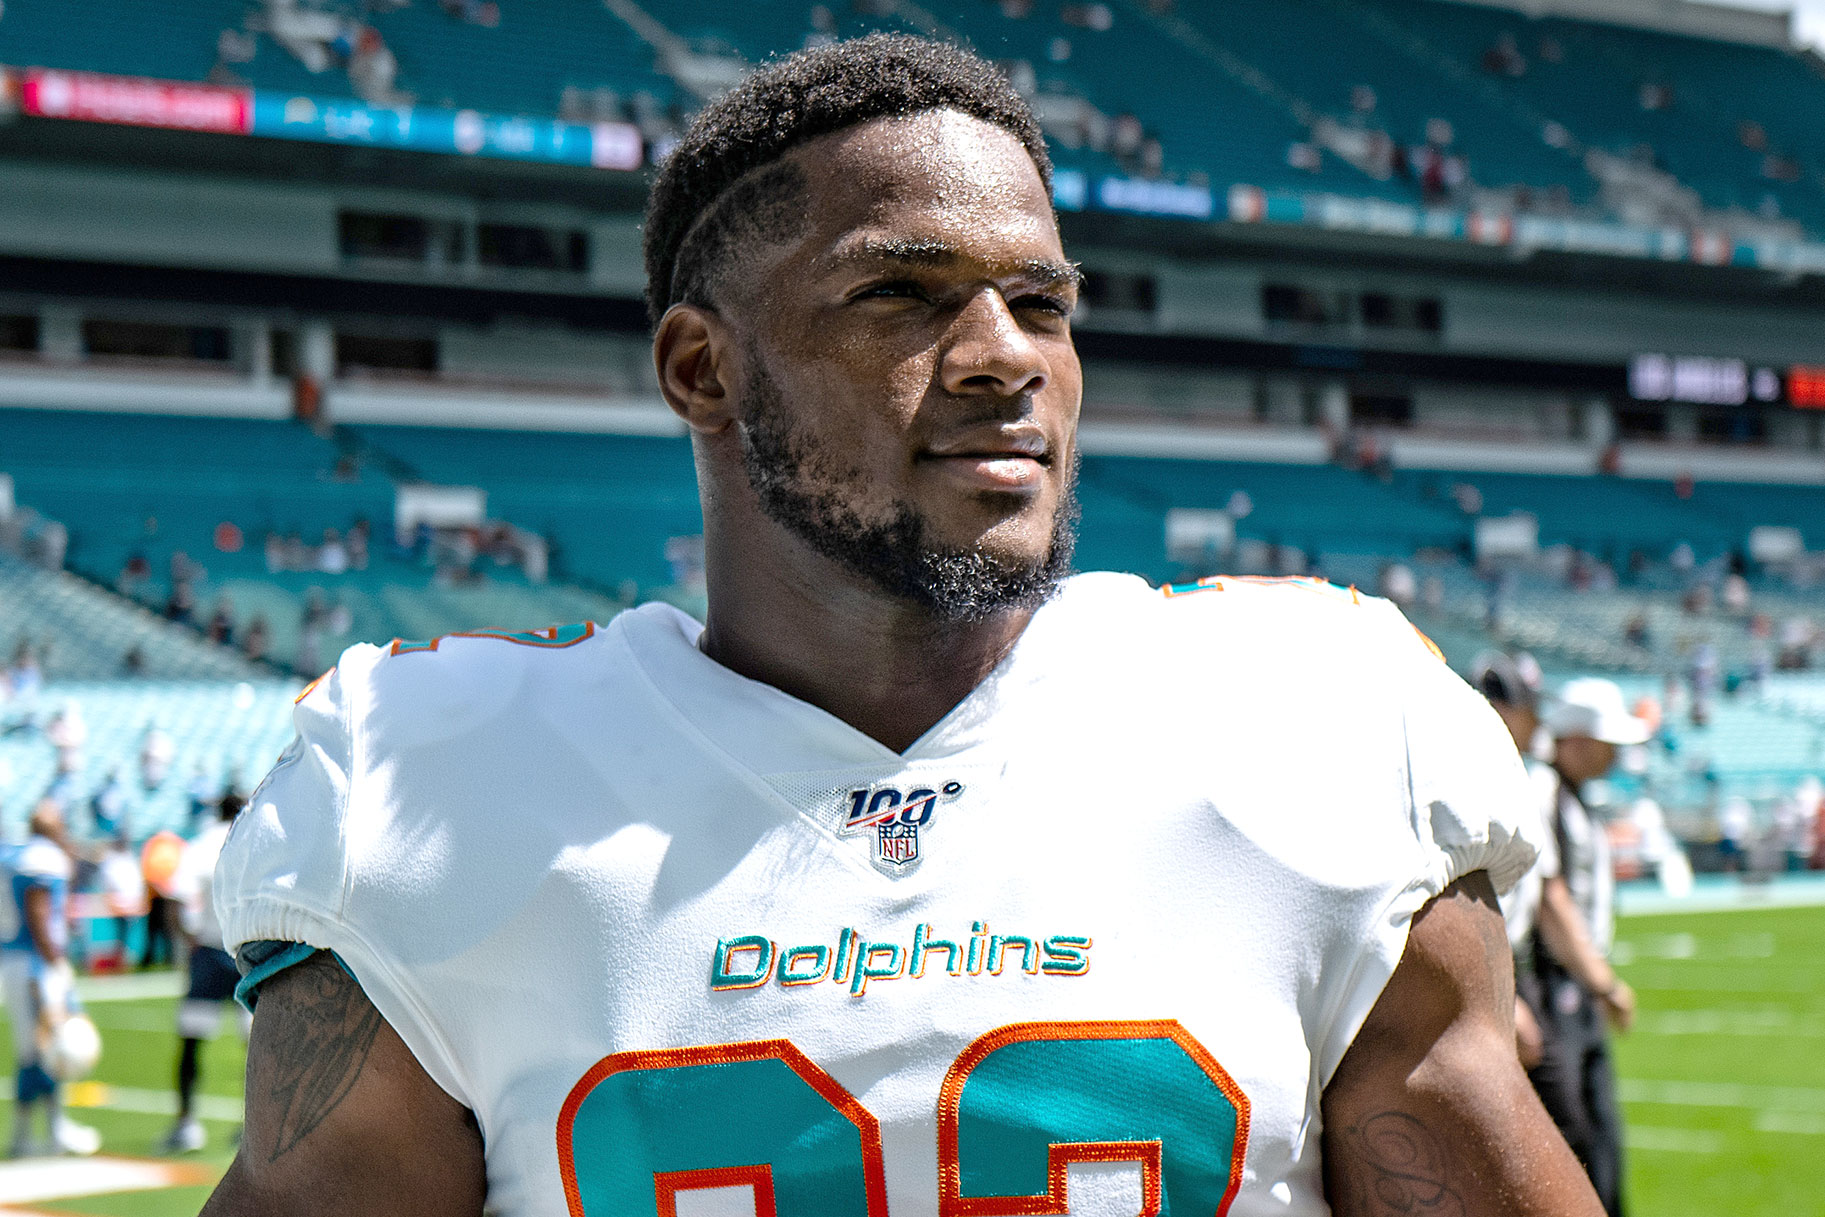 Mark Walton Cut From Miami Dolphins After Alleged Assault | Crime News